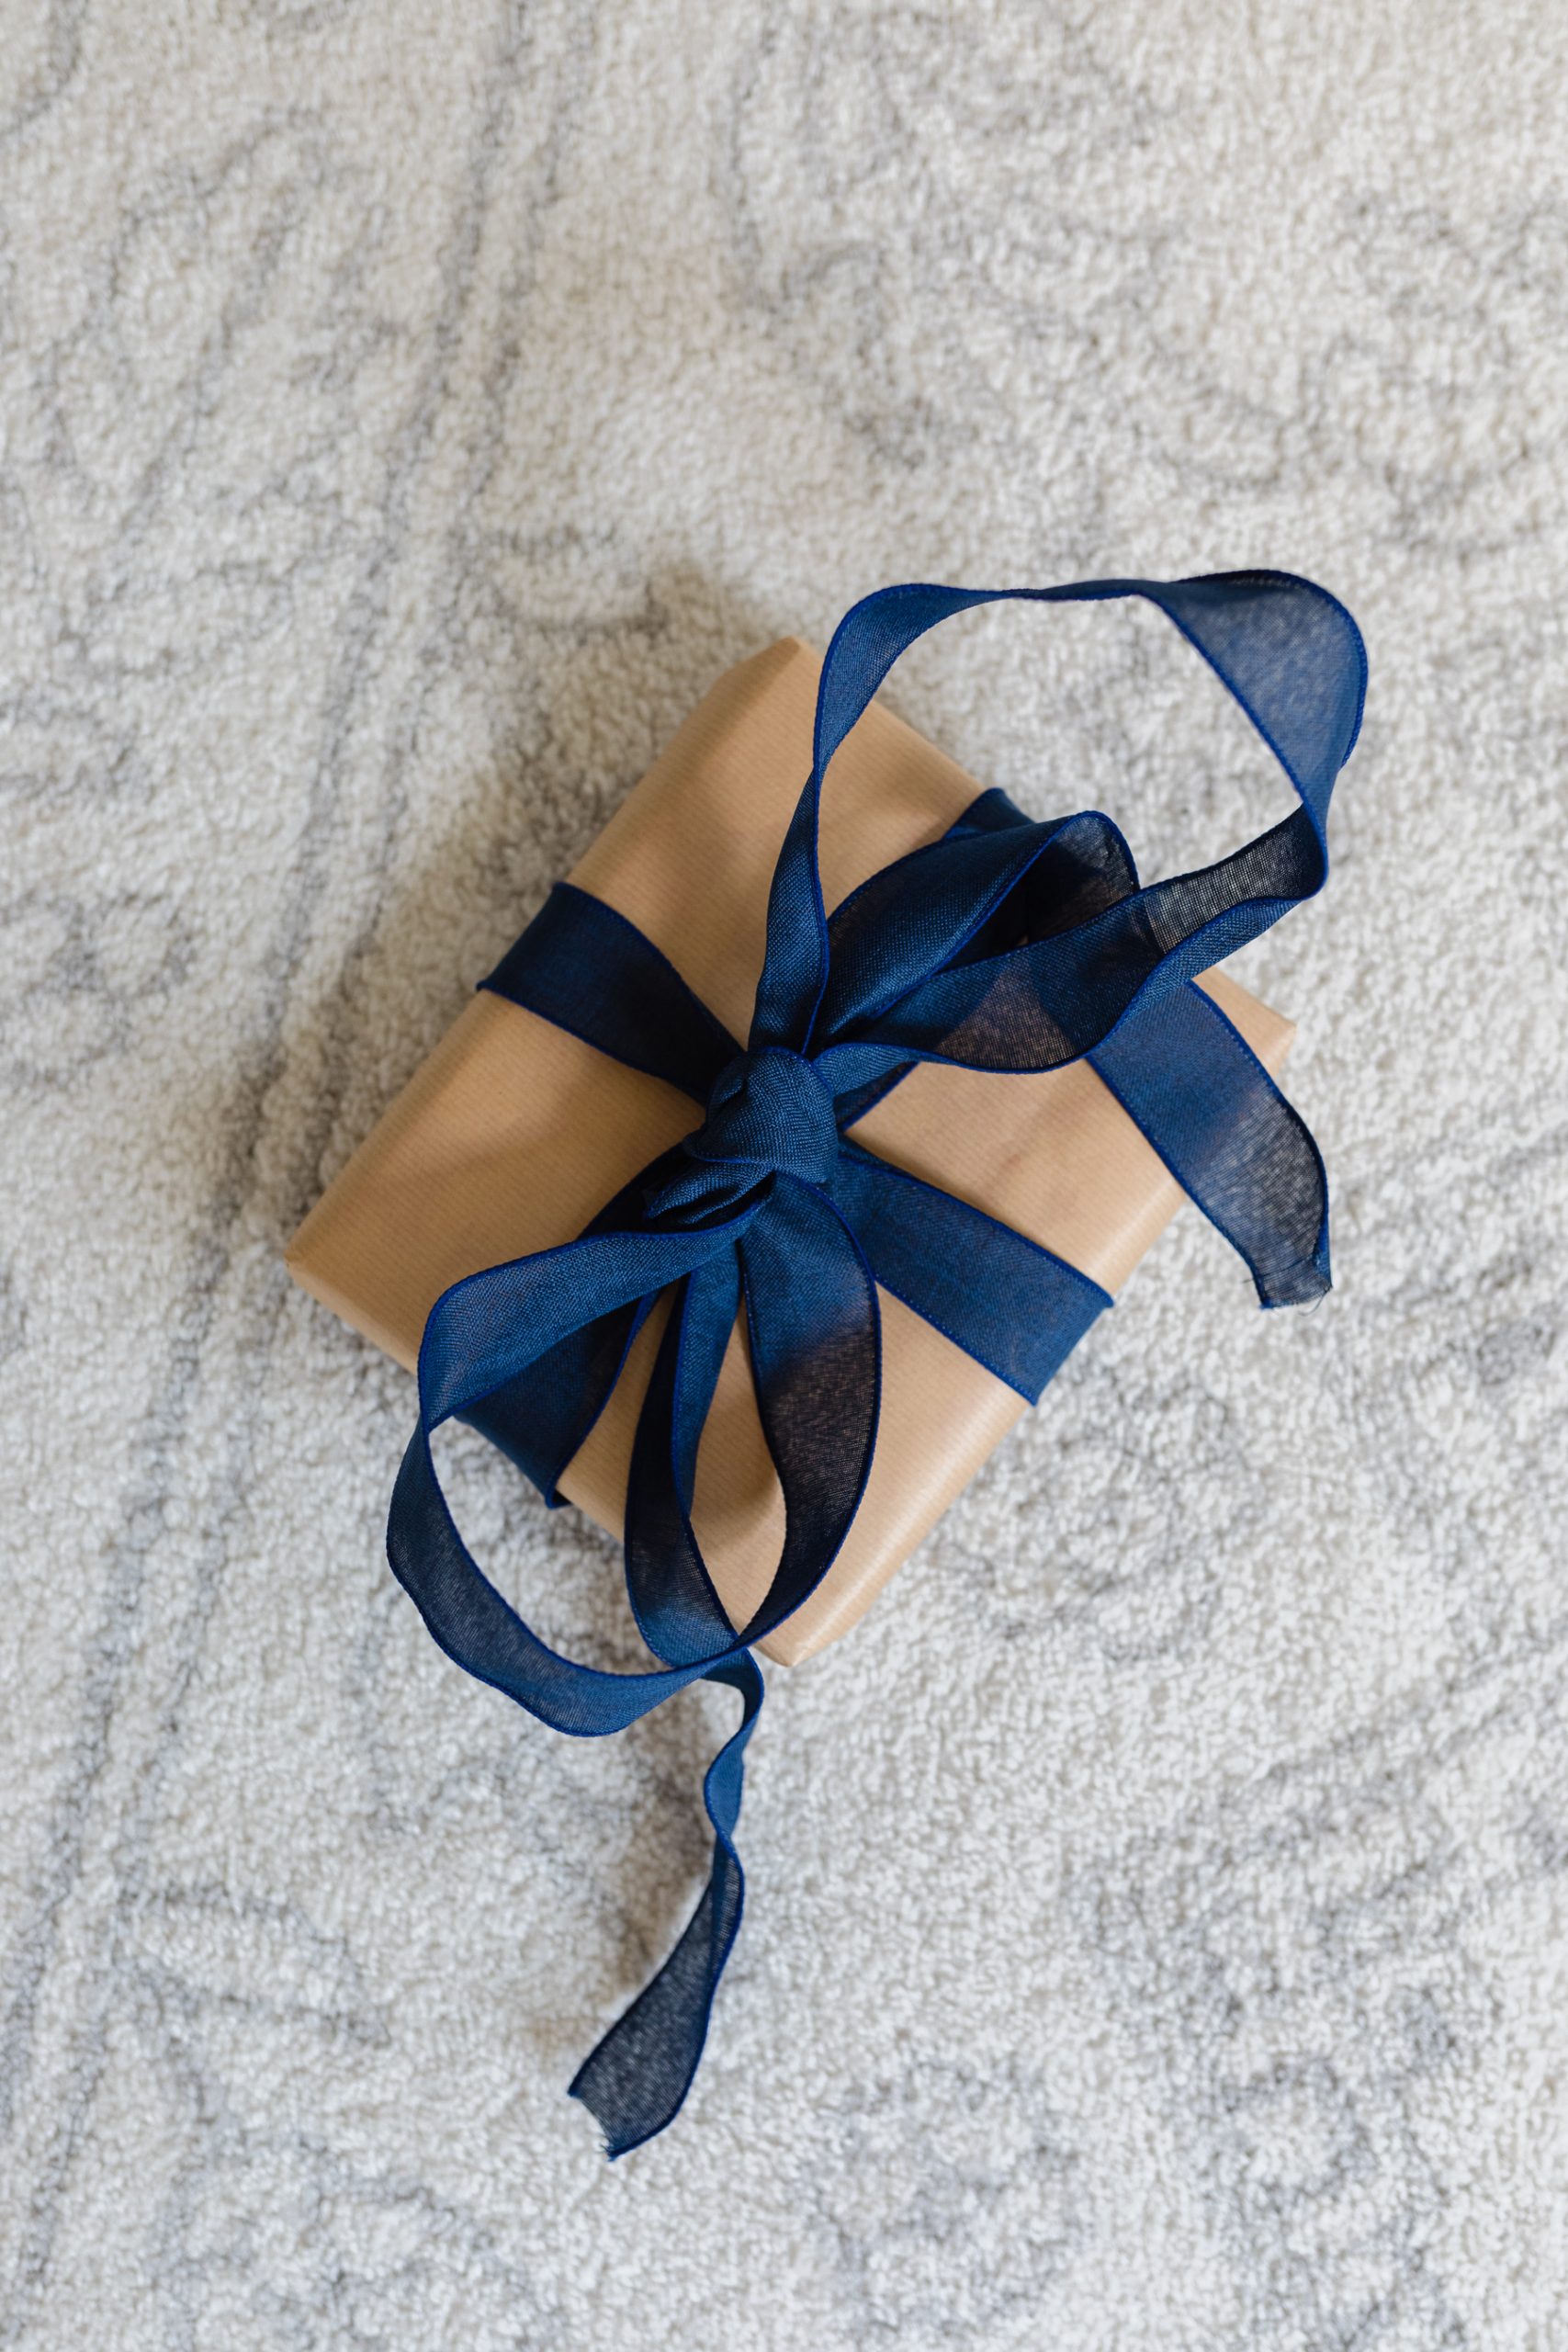 gift wrapped in brown paper with blue bow